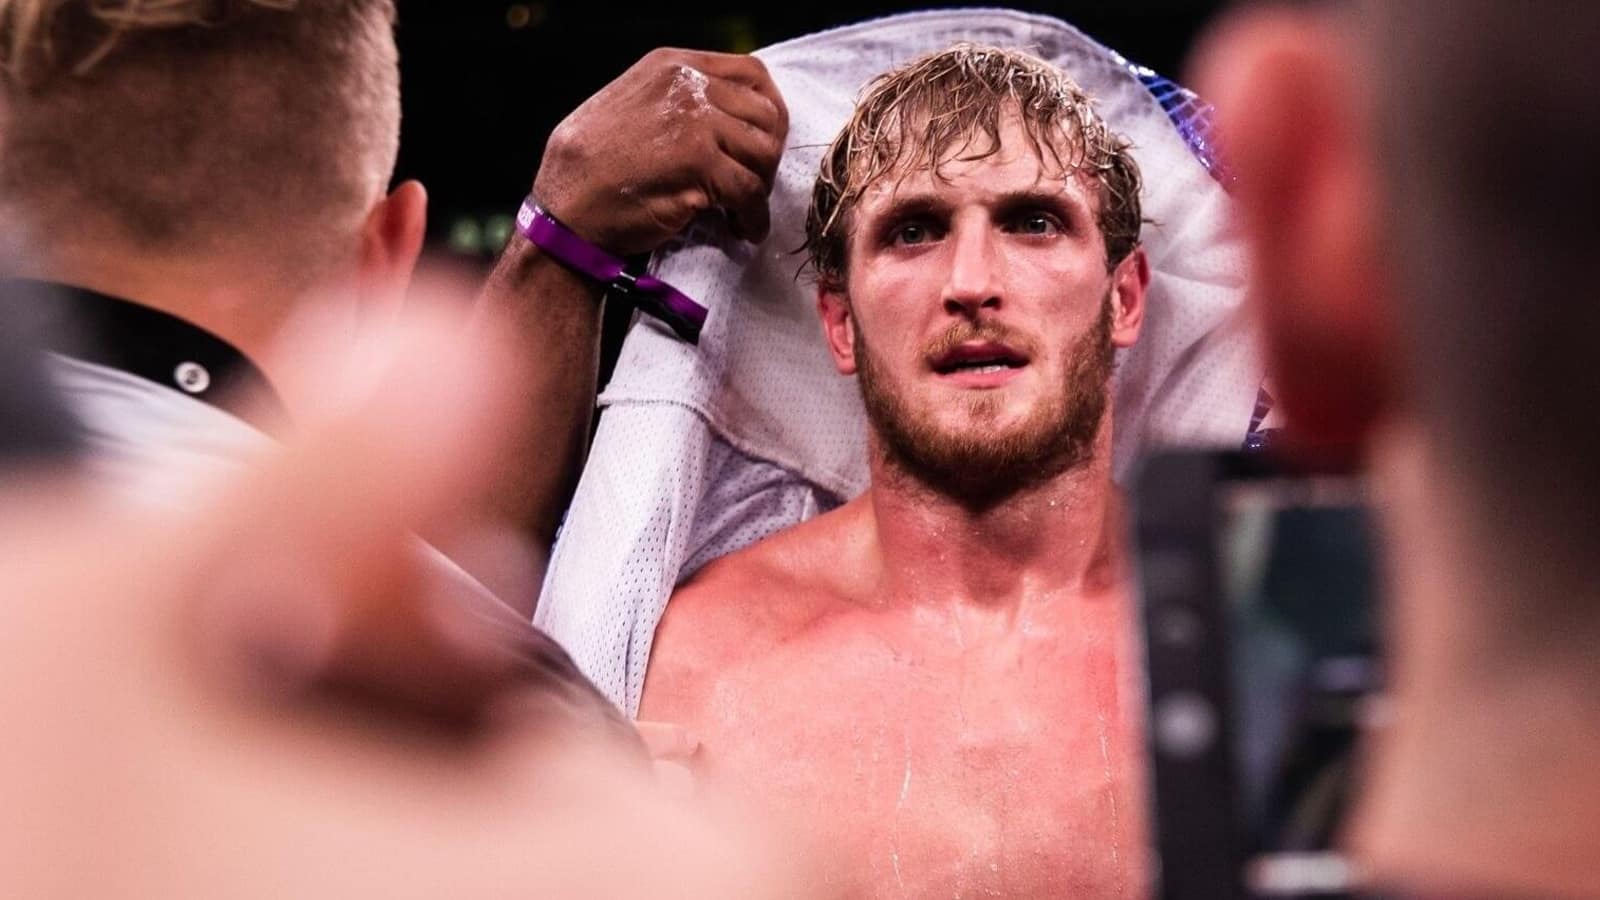 Logan Paul unveils at boxing fight.